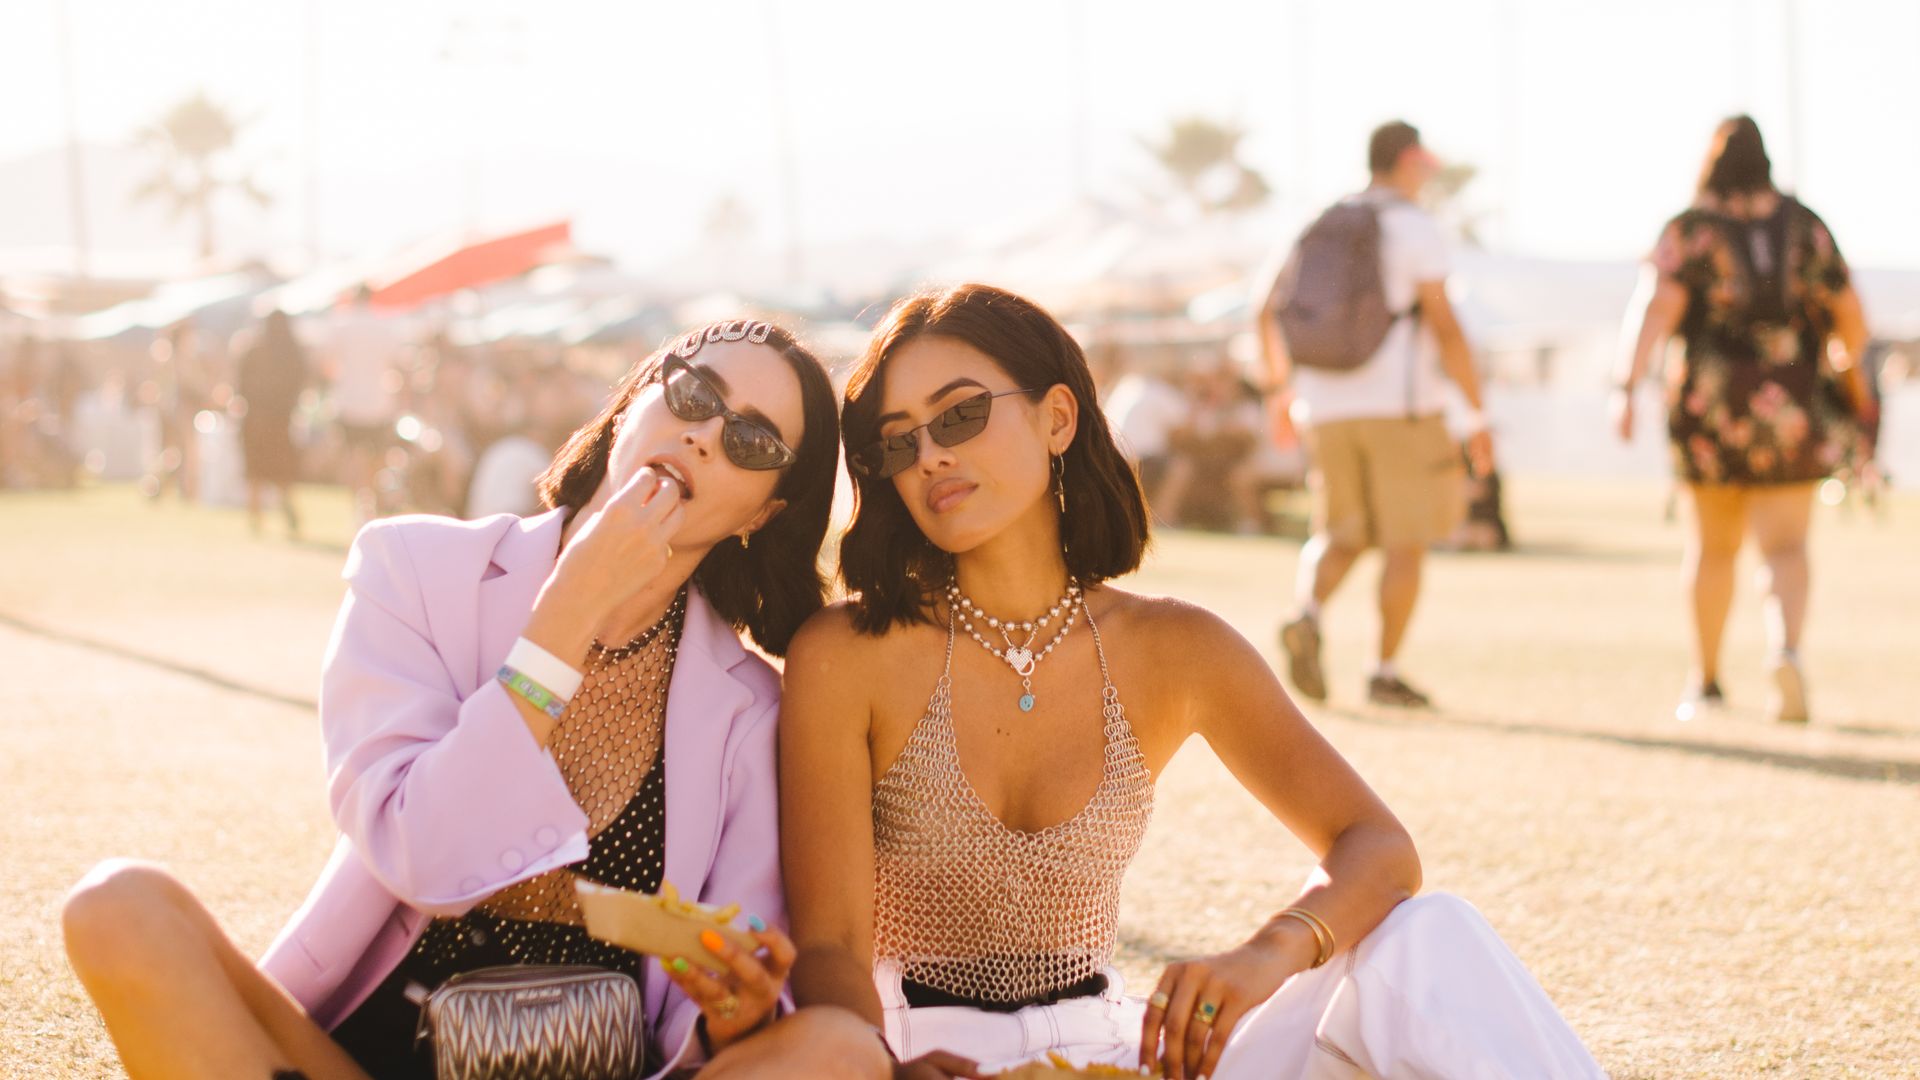 The 30 best Coachella festival outfits of all time